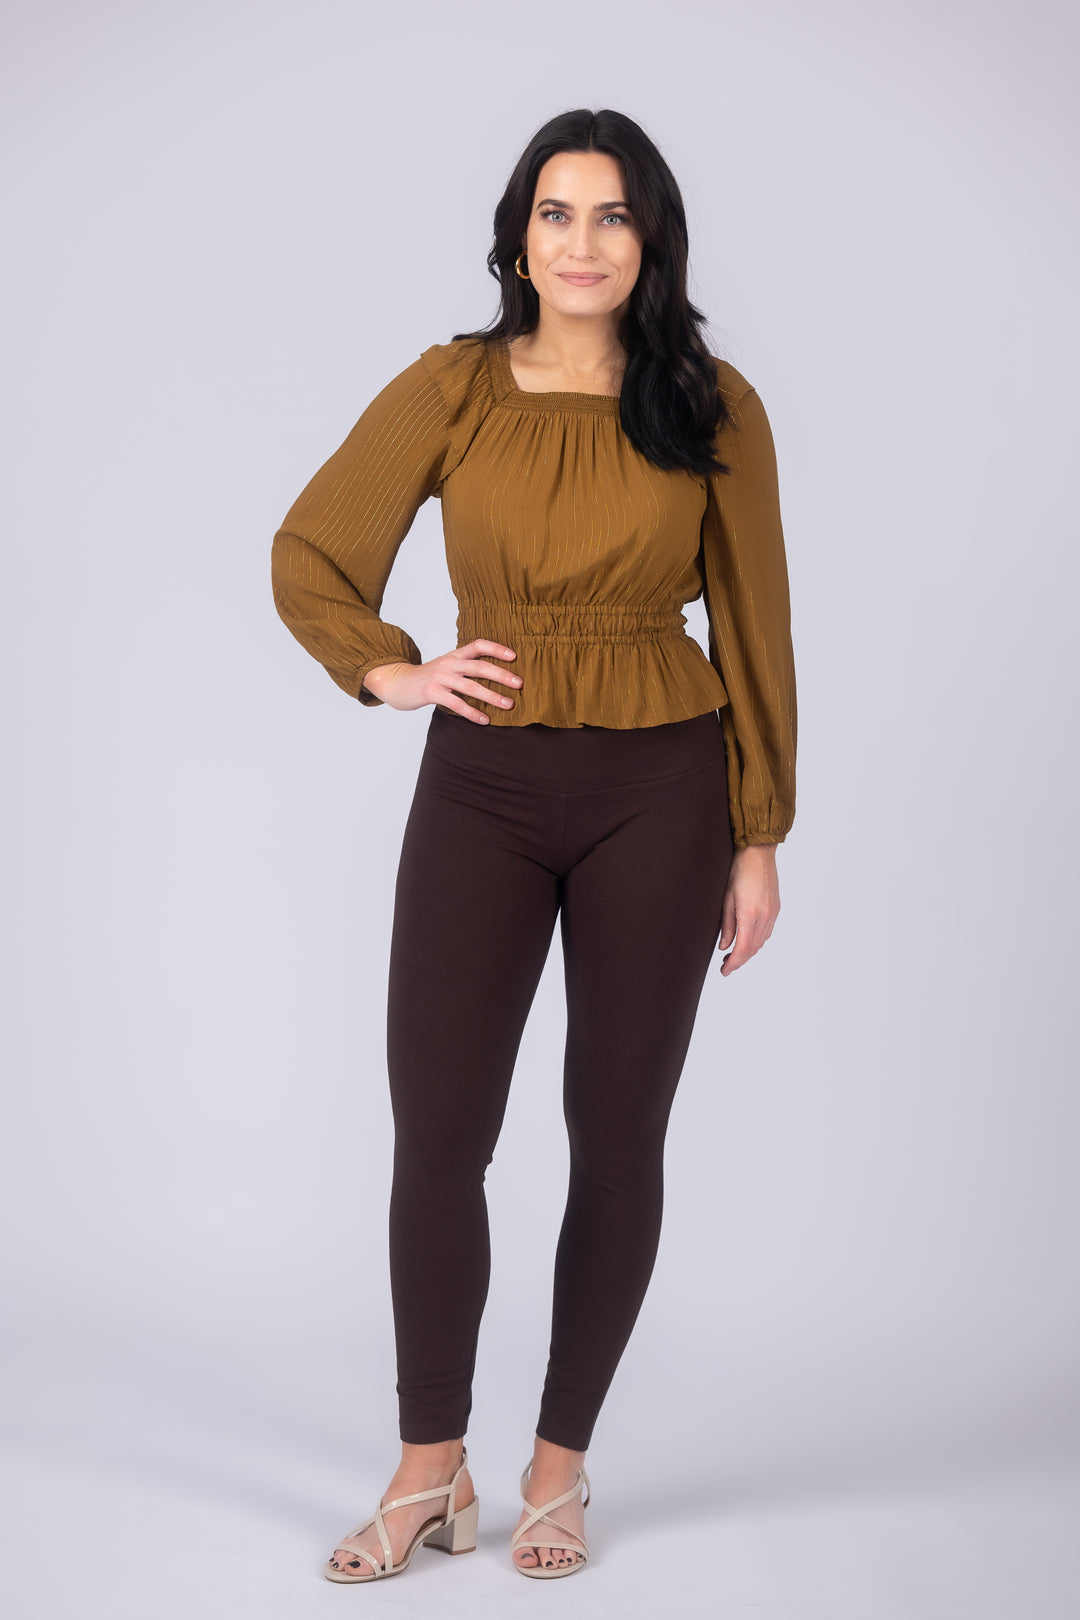 Intro Love The Fit Women's Blue Knit Corduroy Leggings Tummy Control Large  #1441 - $21 - From Tana